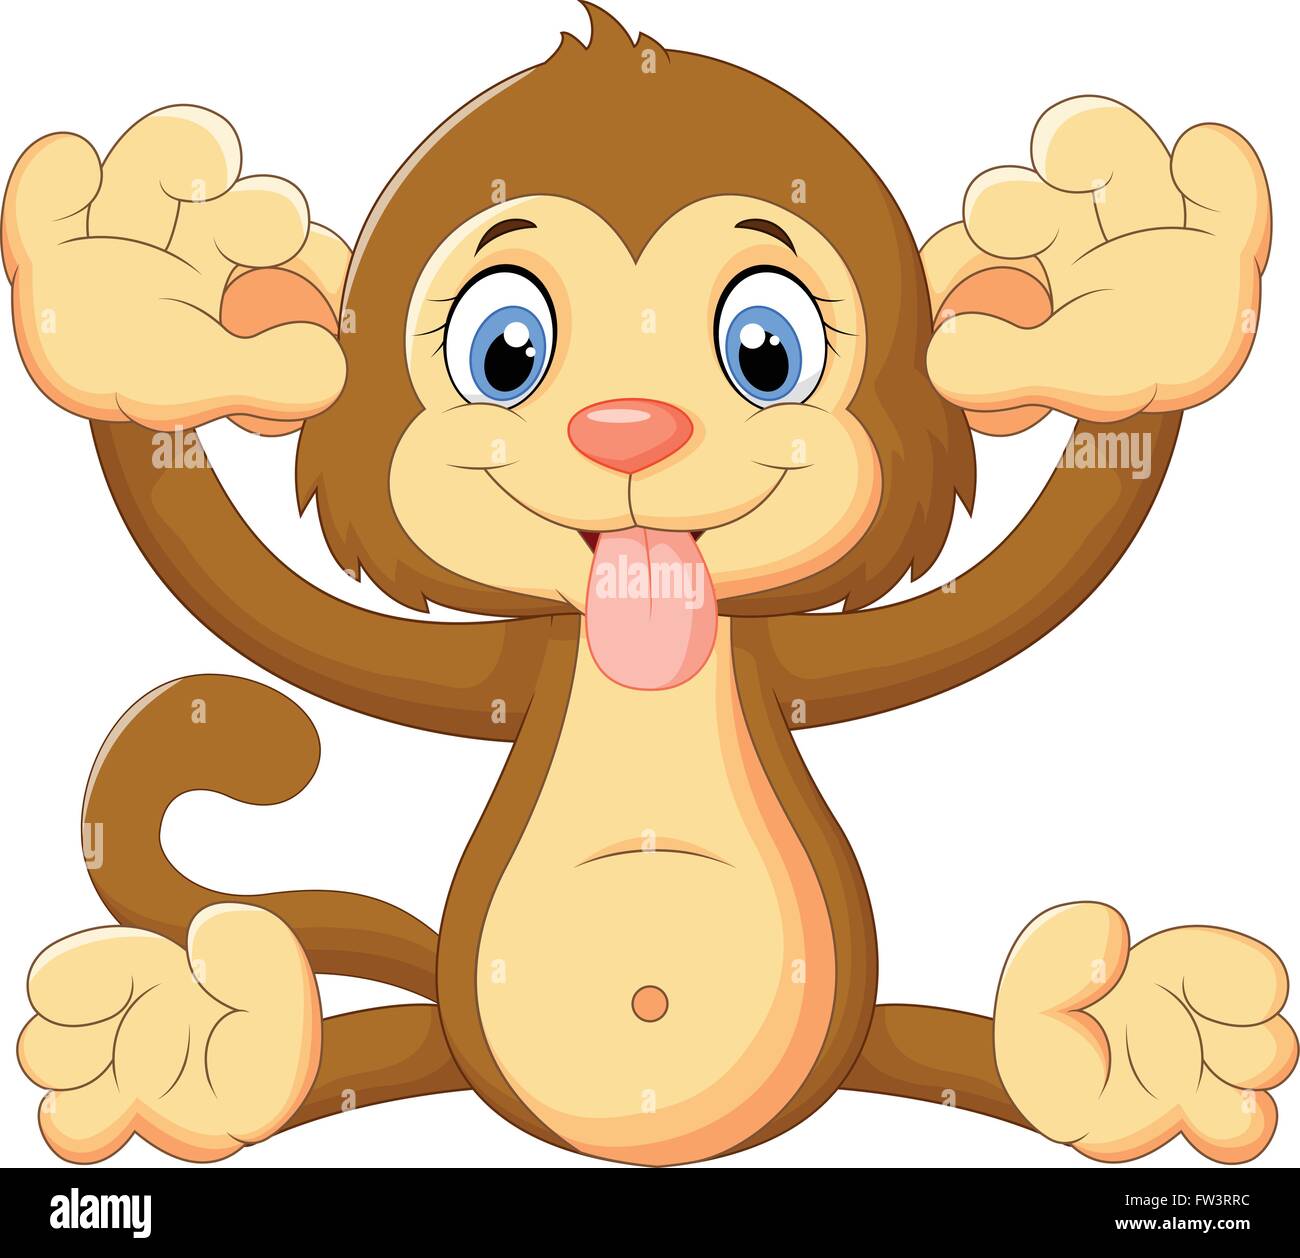 Cartoon Monkey Making A Face And Showing His Tongue Stock Vector Image Art Alamy